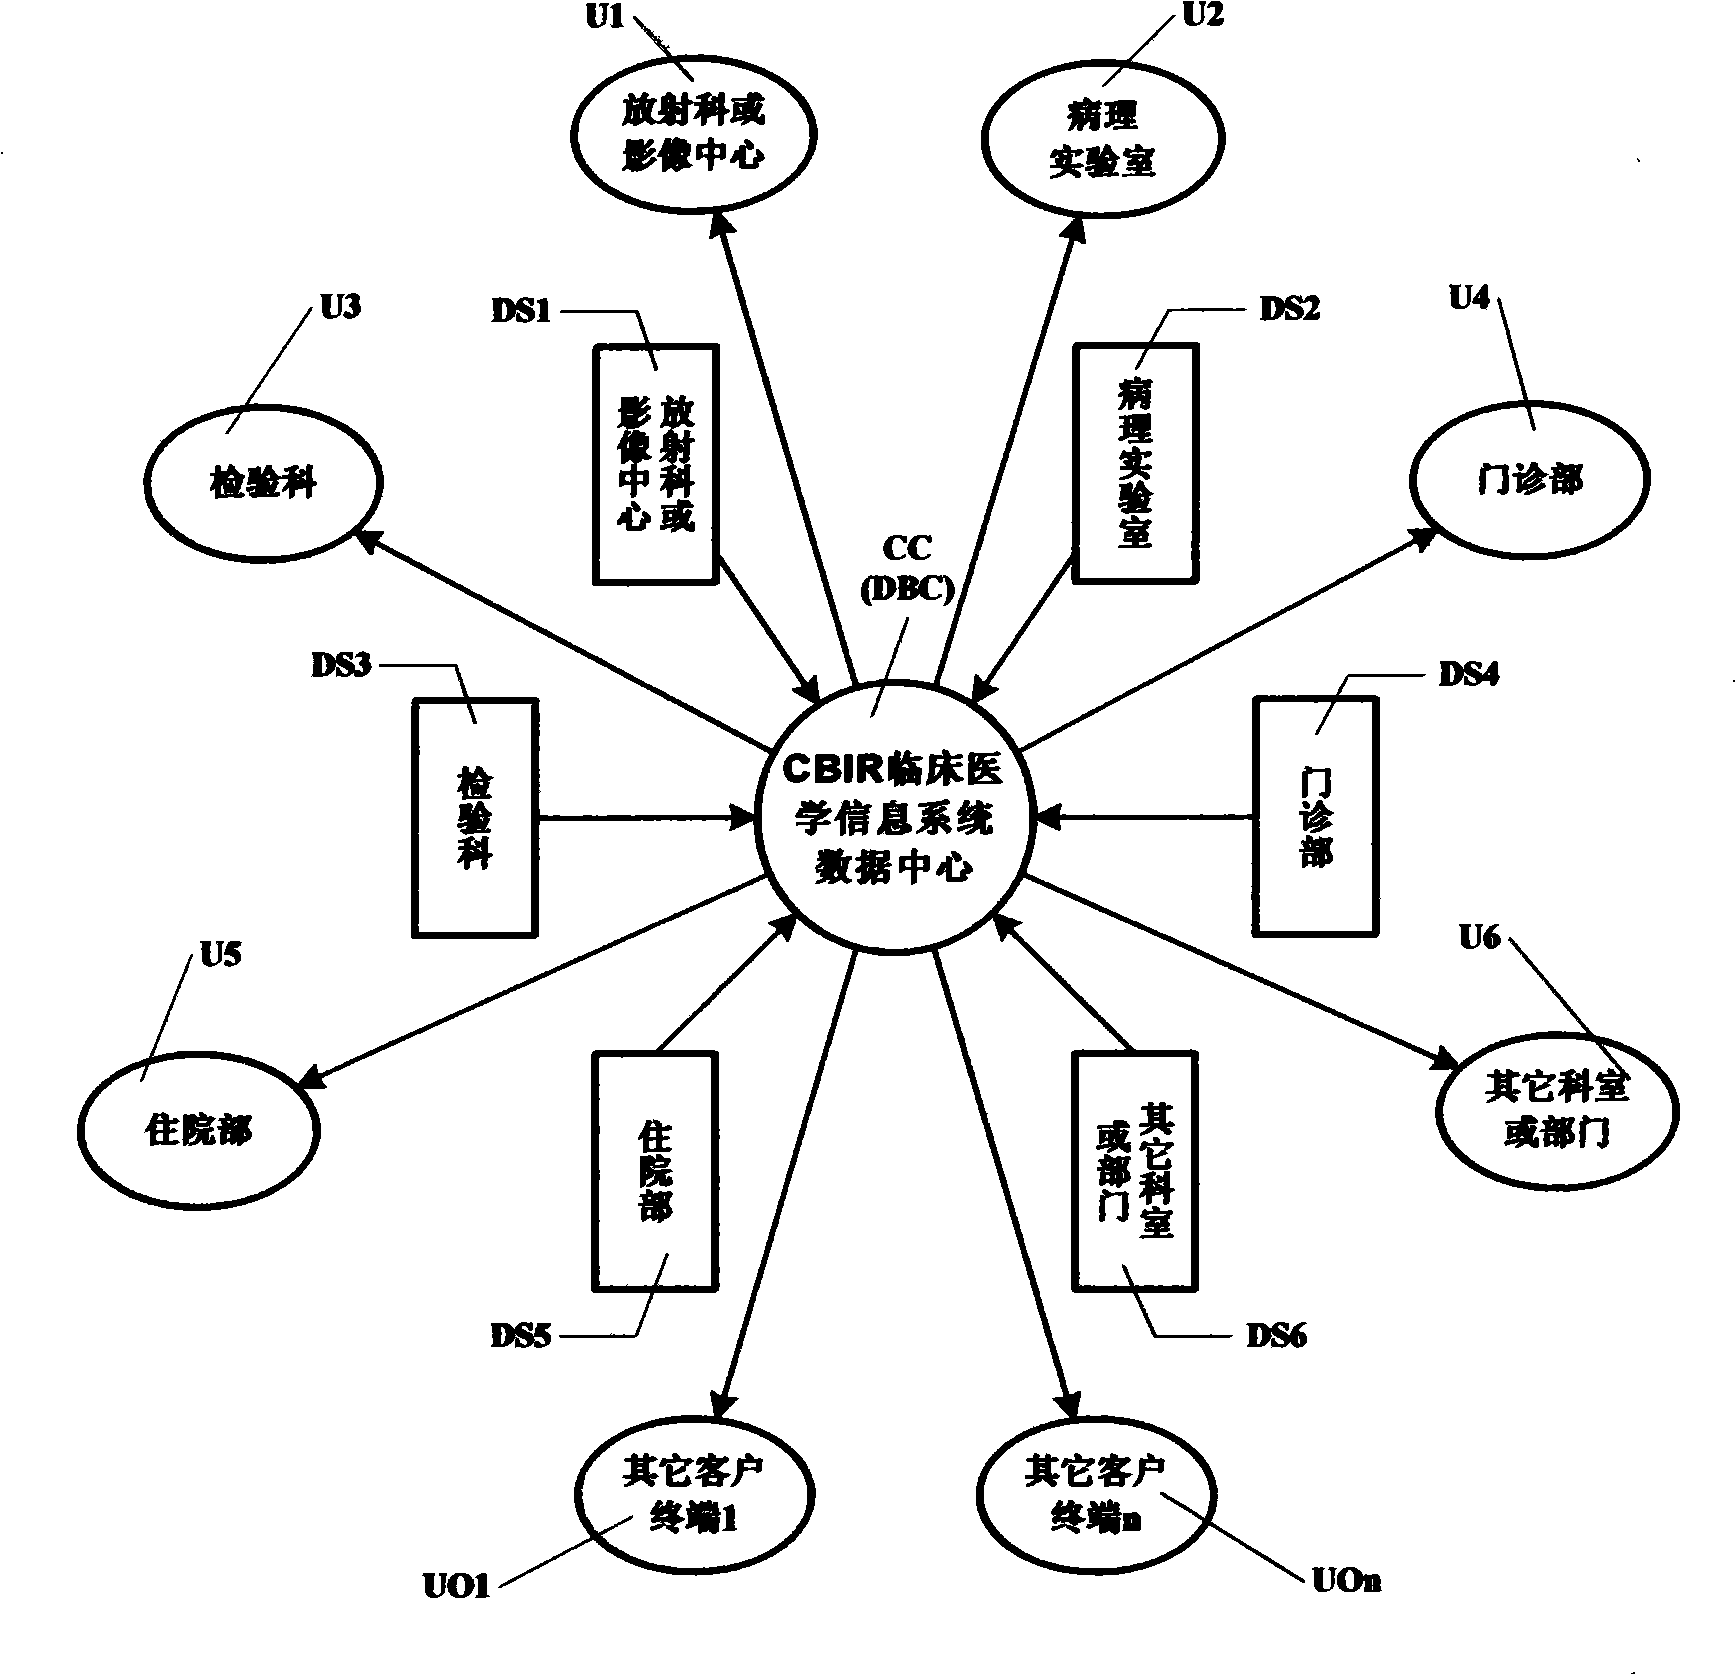 Composition and information query method of clinical medicine information system in hospital